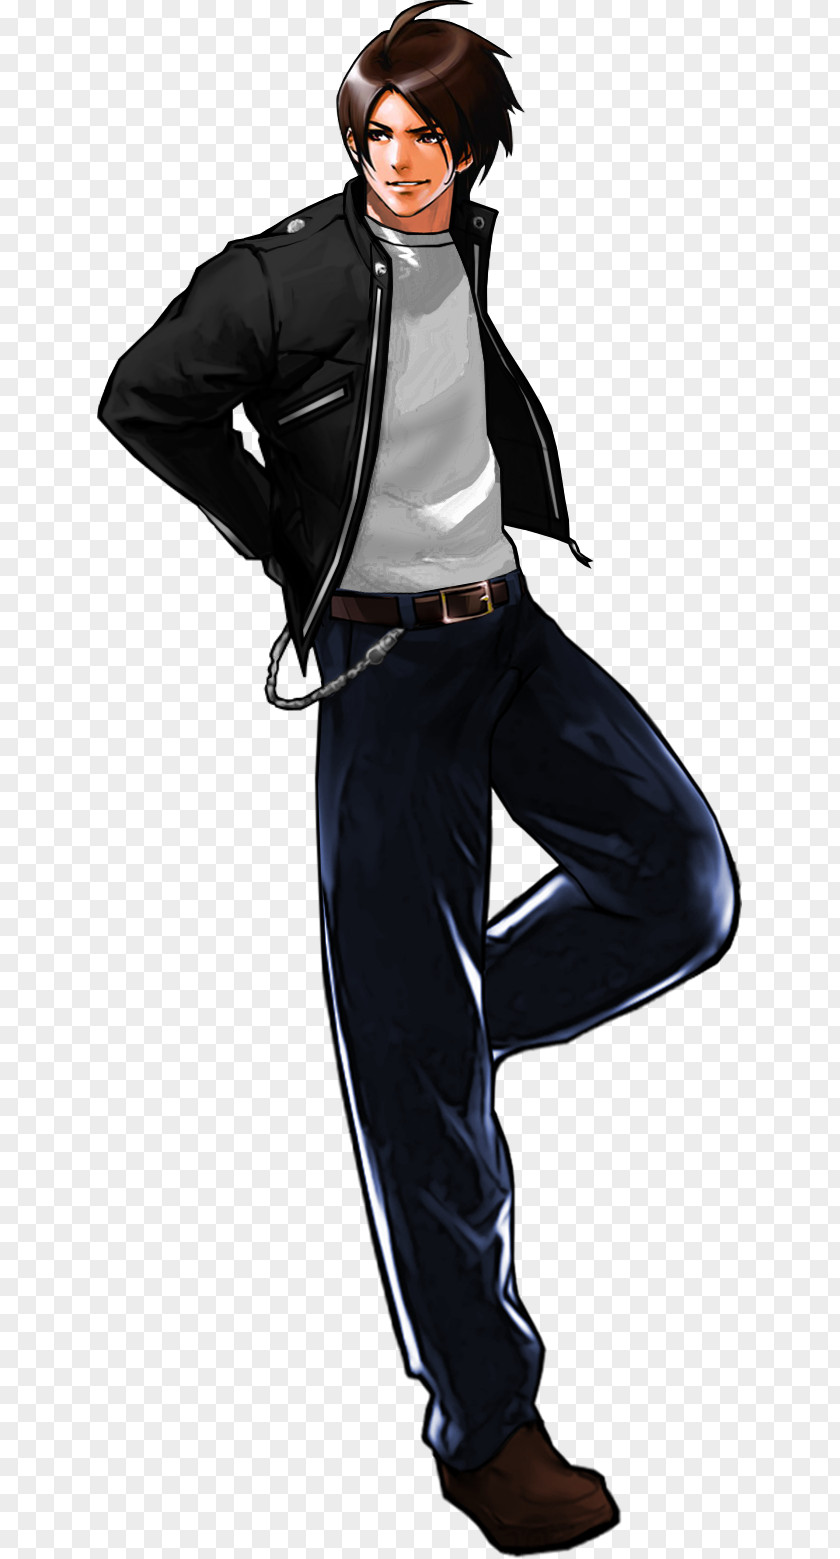 The King Of Fighters XIII Fighters: Maximum Impact Kyo Kusanagi '98 M.U.G.E.N PNG